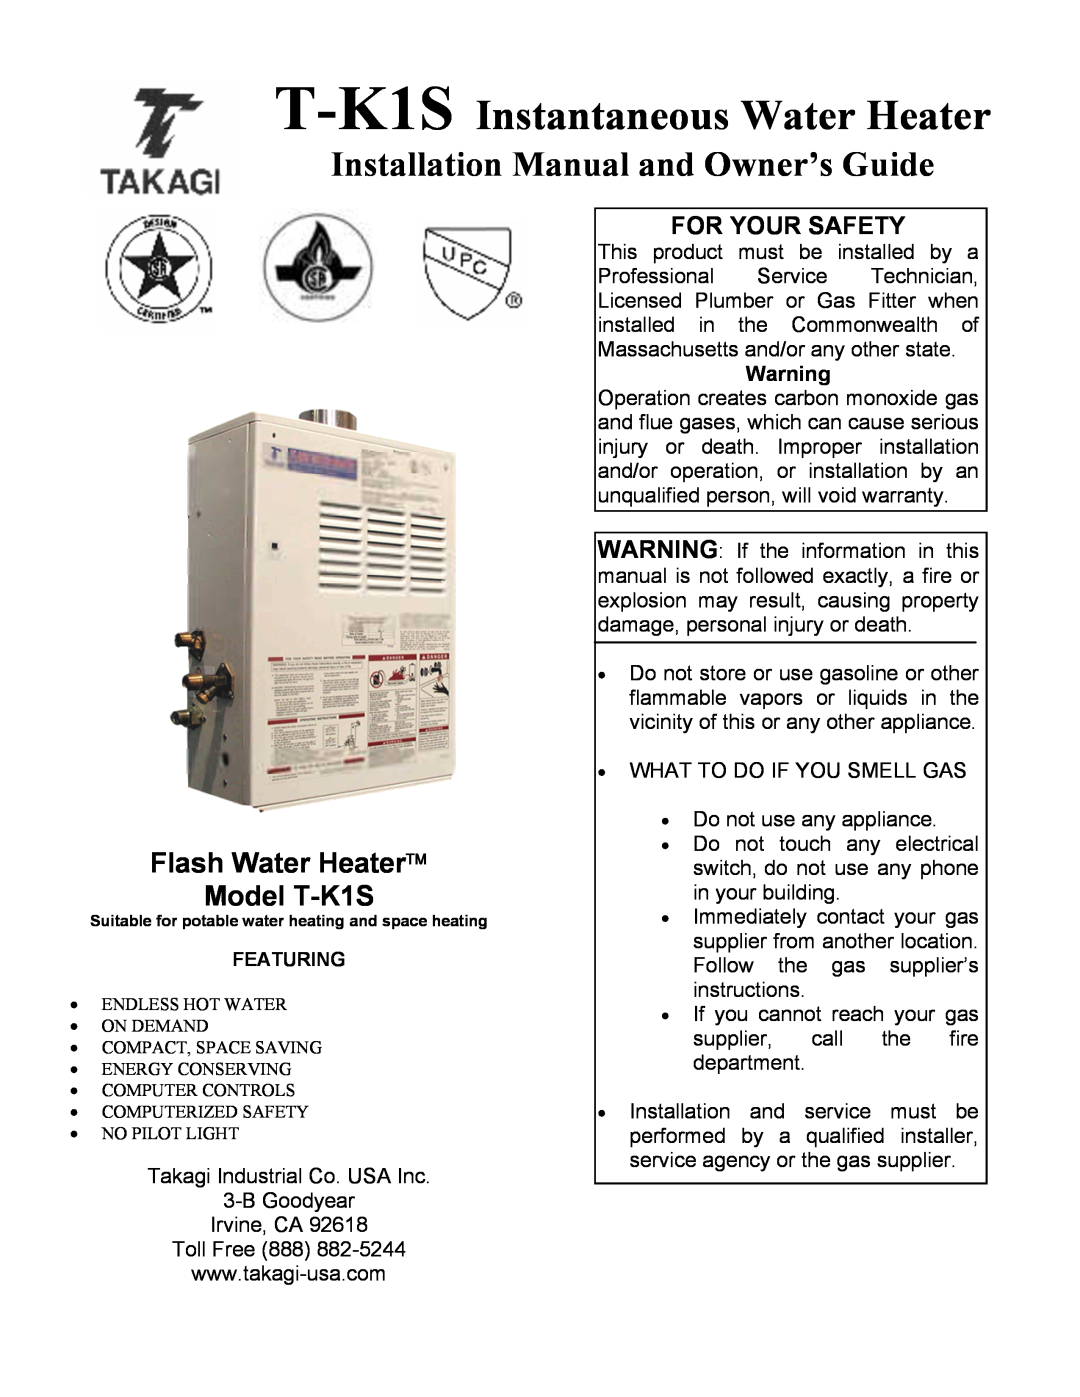 Whirlpool installation manual Installation Manual and Owner’s Guide, Flash Water Heater Model T-K1S, For Your Safety 